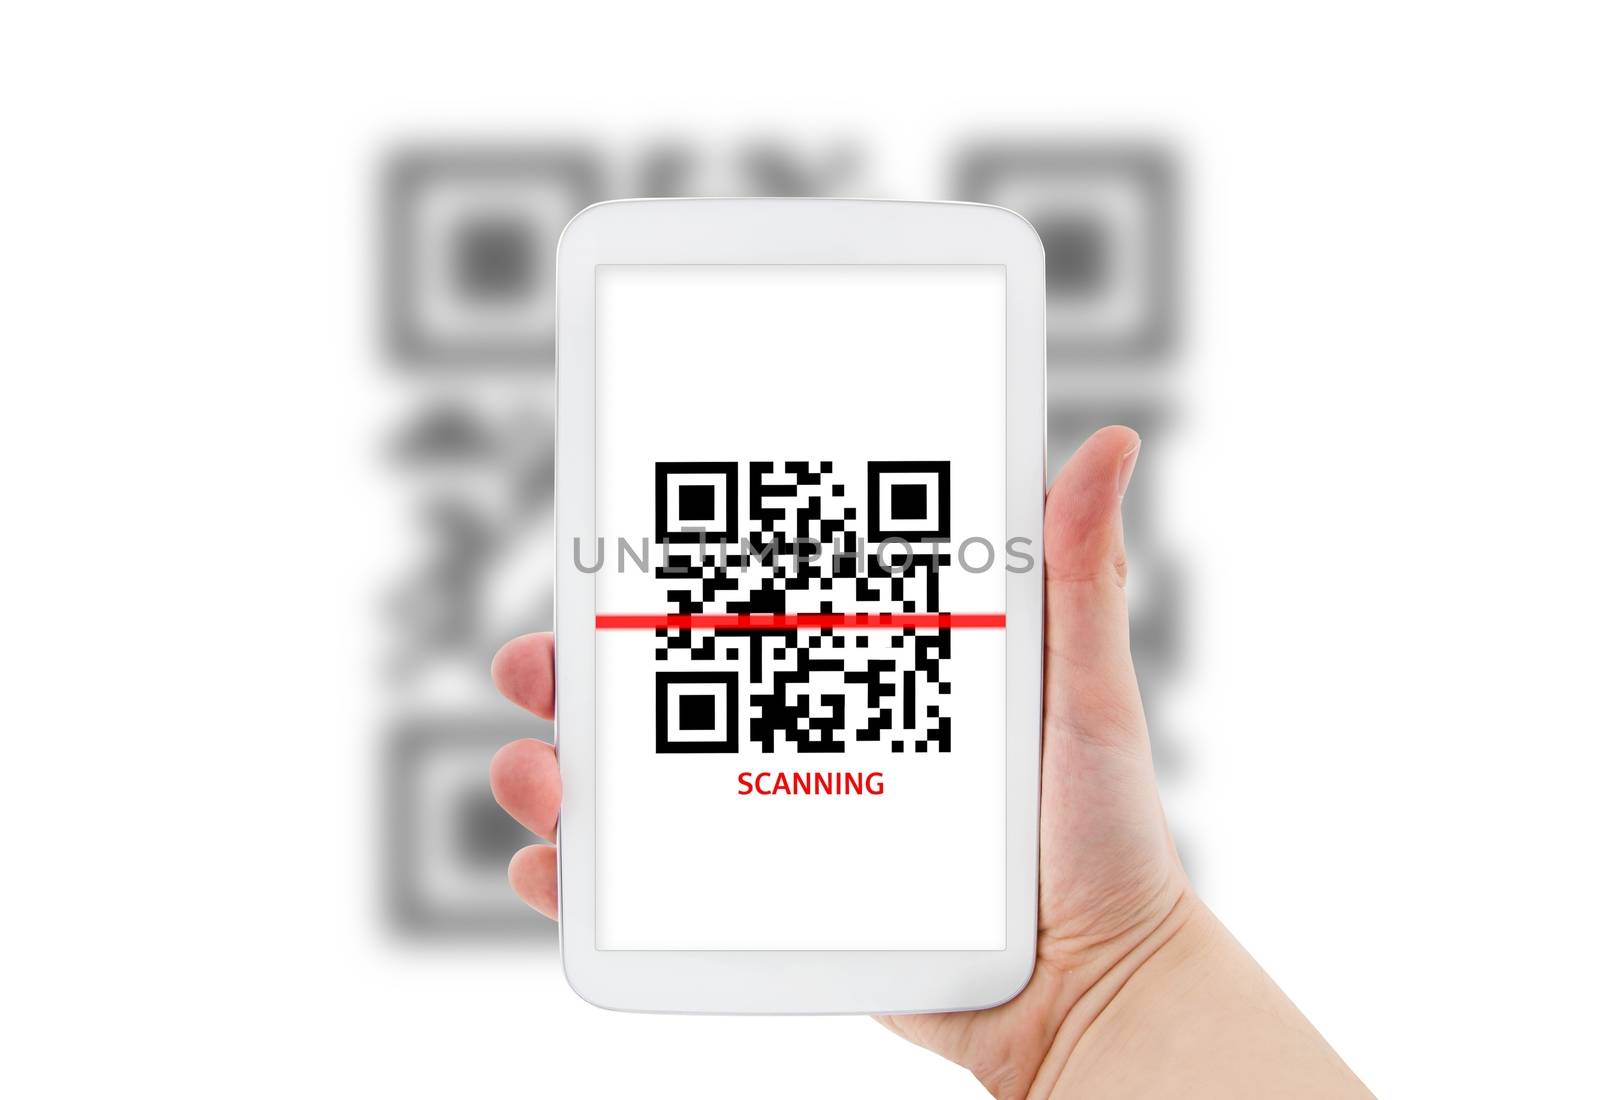 Tablet scanning QR code by simpson33